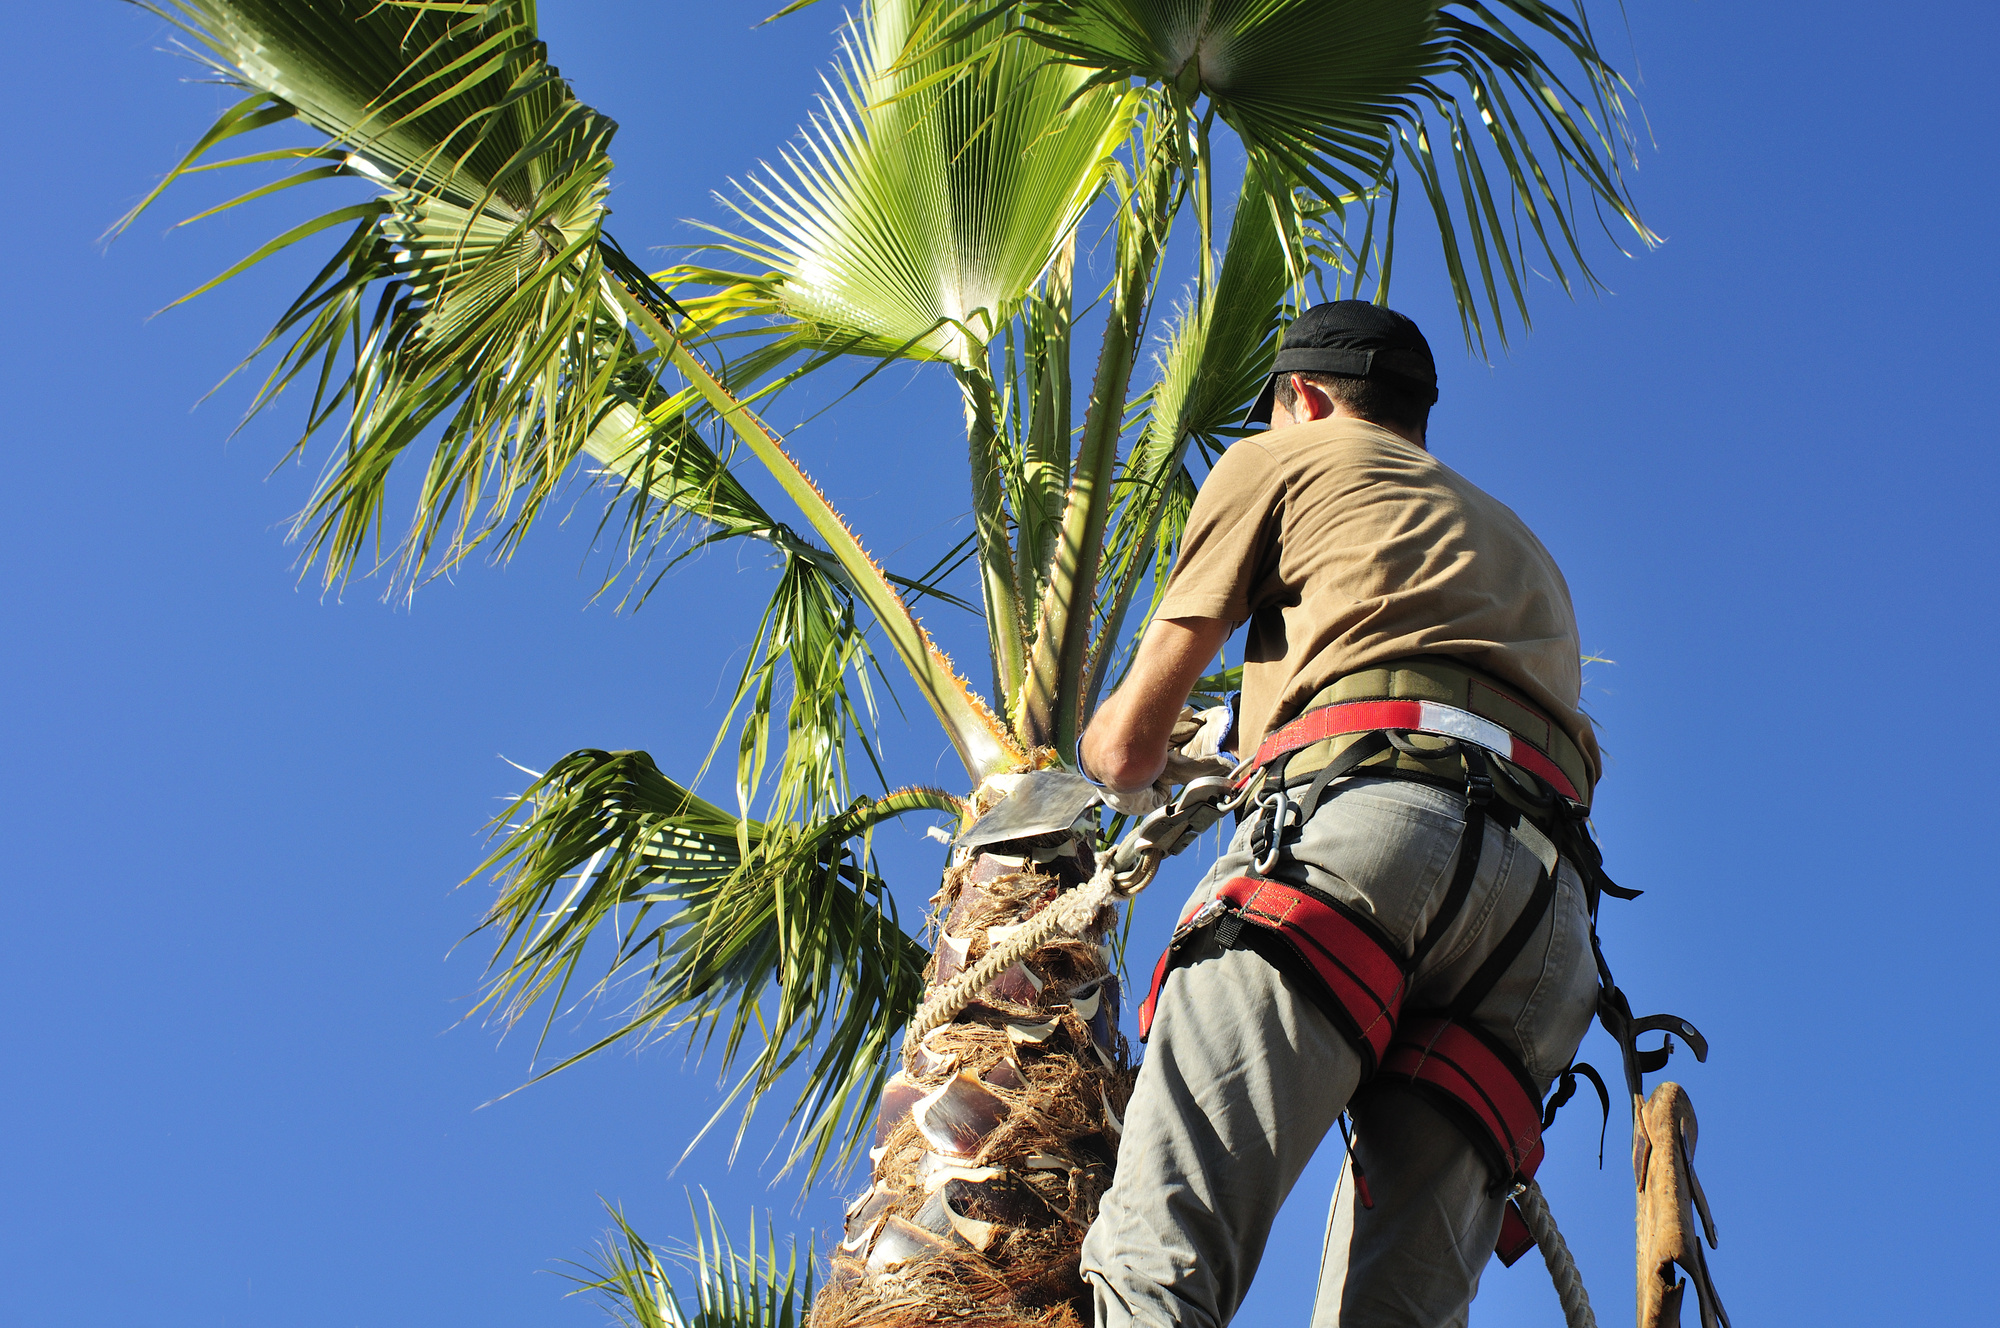 Pensacola tree service professional in harness performing palm tree trimming